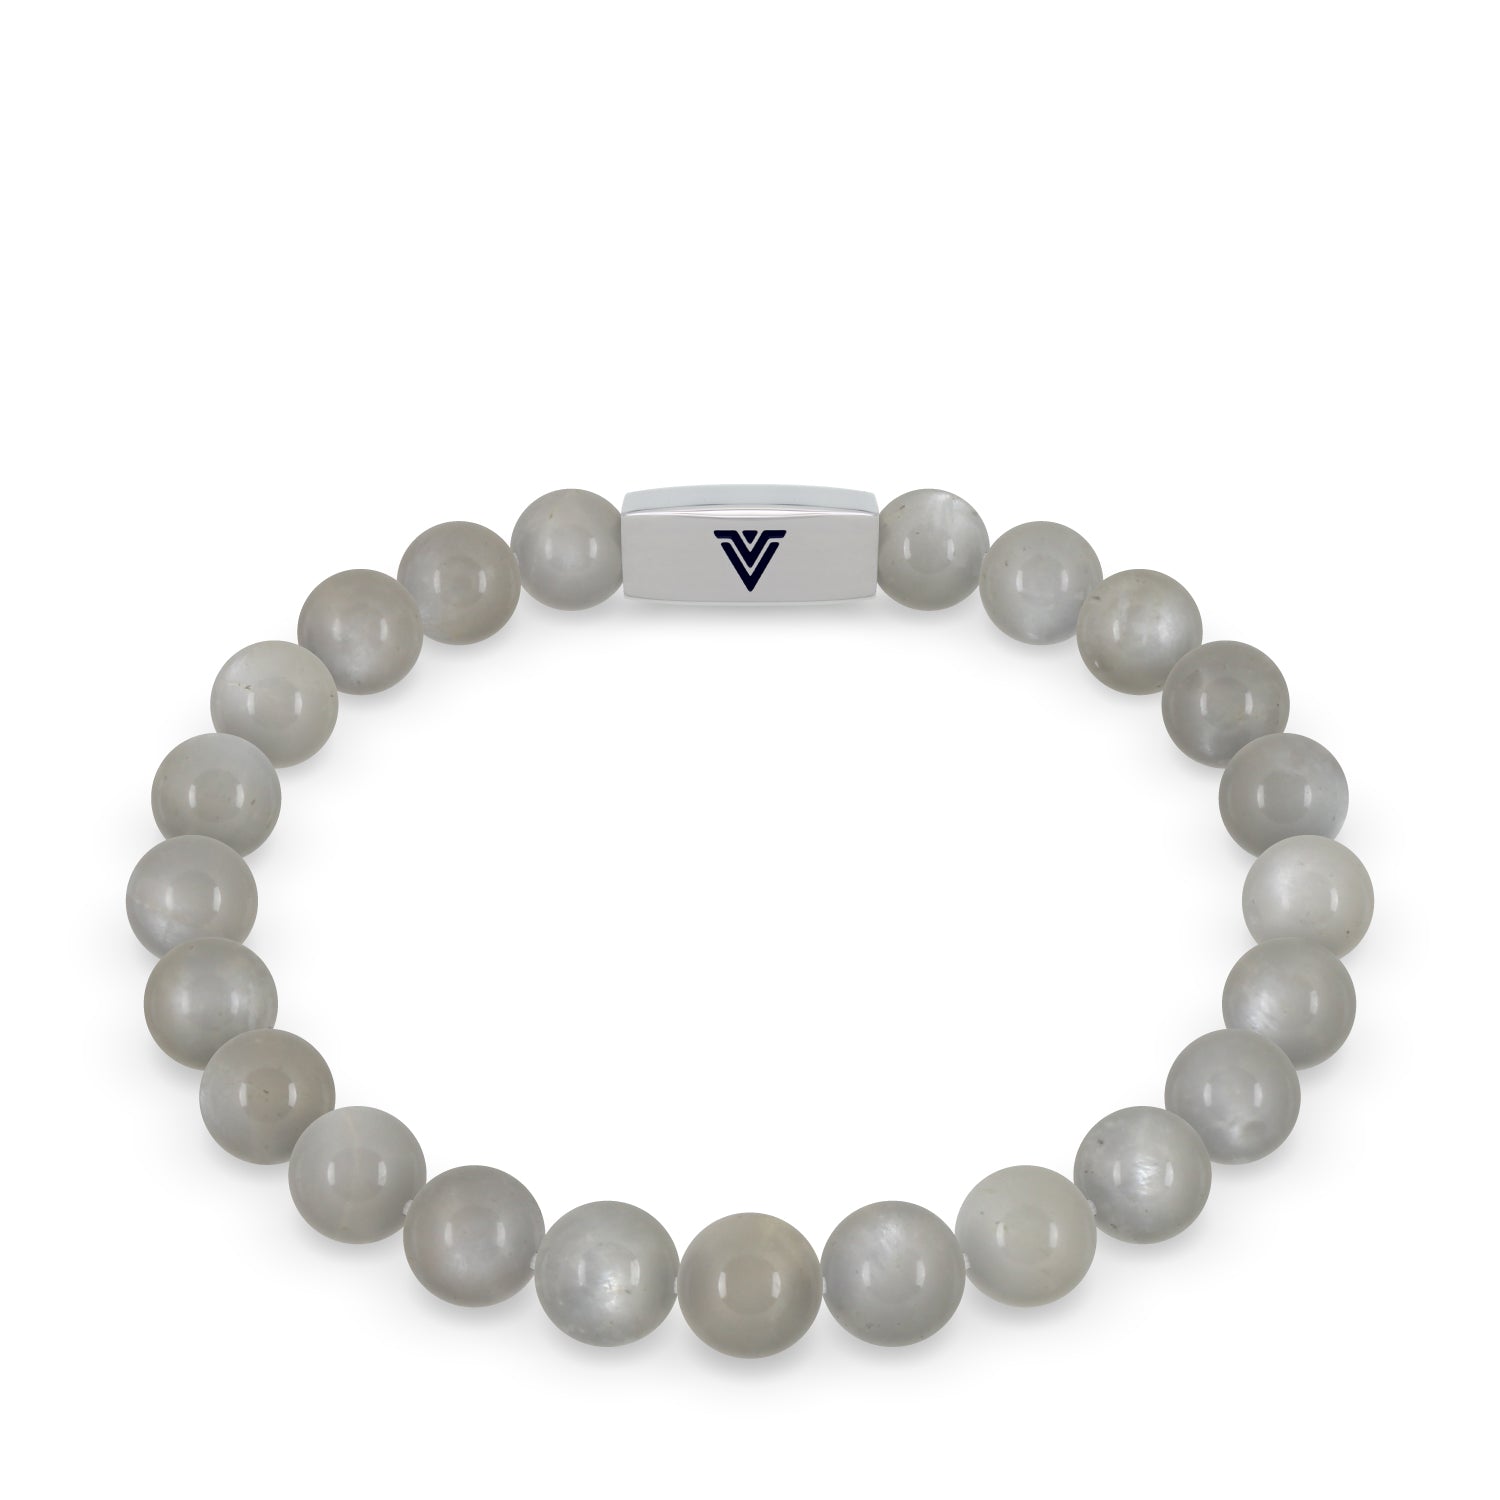 Front view of an 8mm Moonstone beaded stretch bracelet with silver stainless steel logo bead made by Voltlin